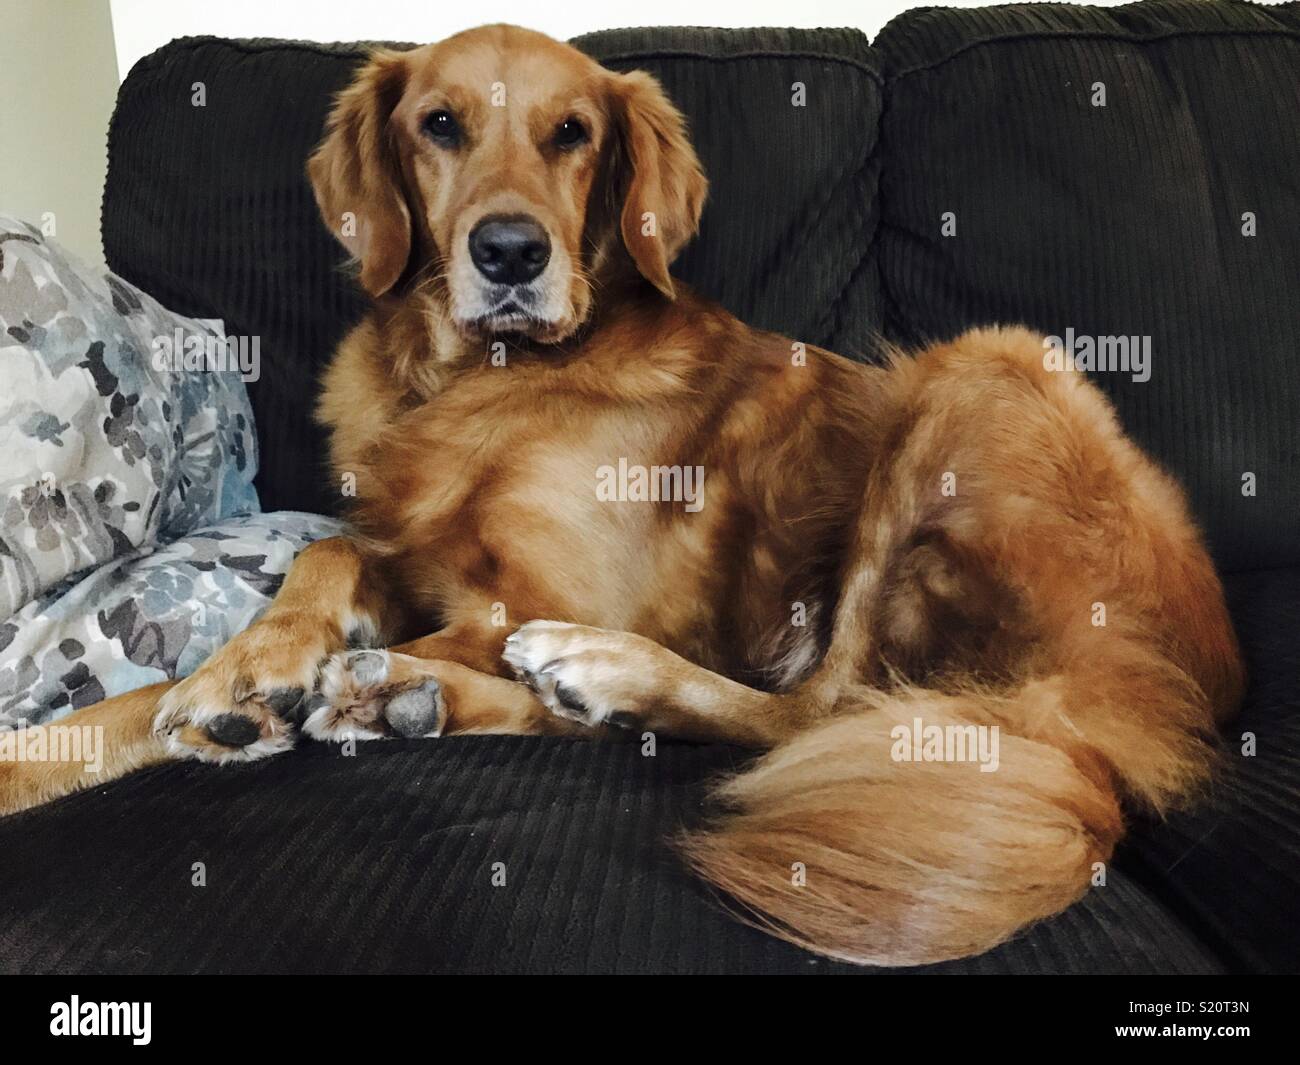 Golden retriever on a couch Stock Photo